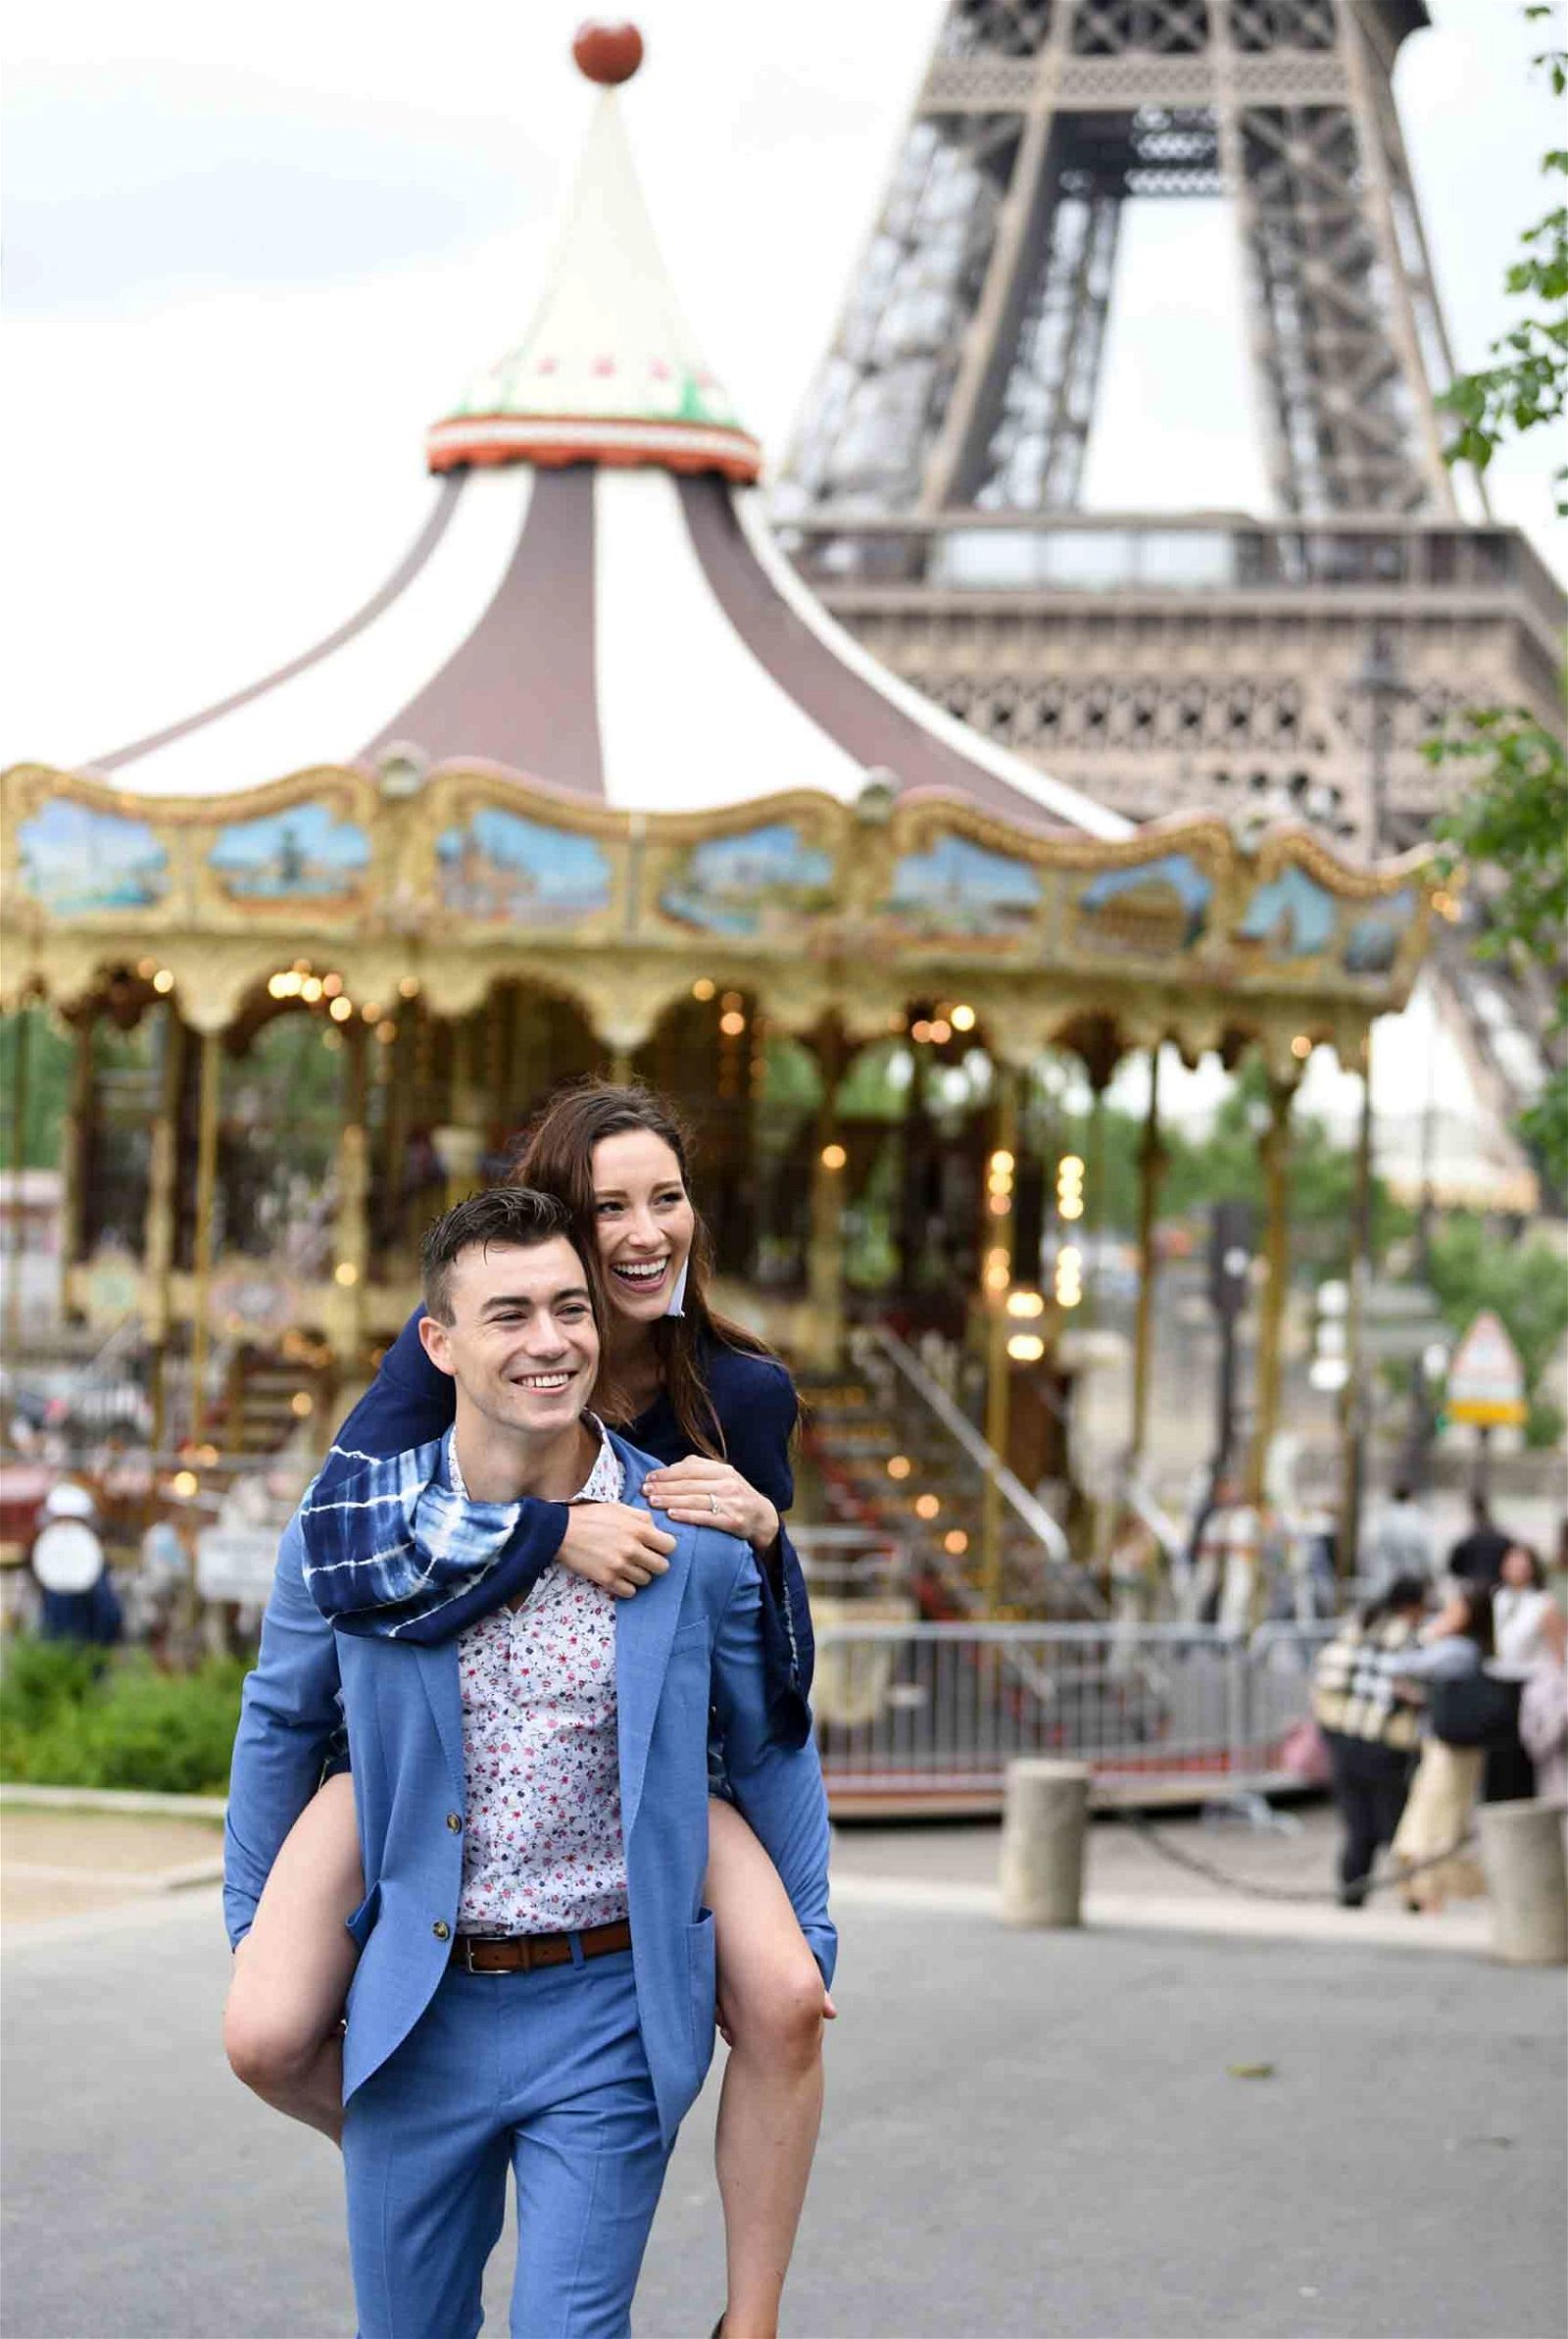 photo of a couple at the carousel.